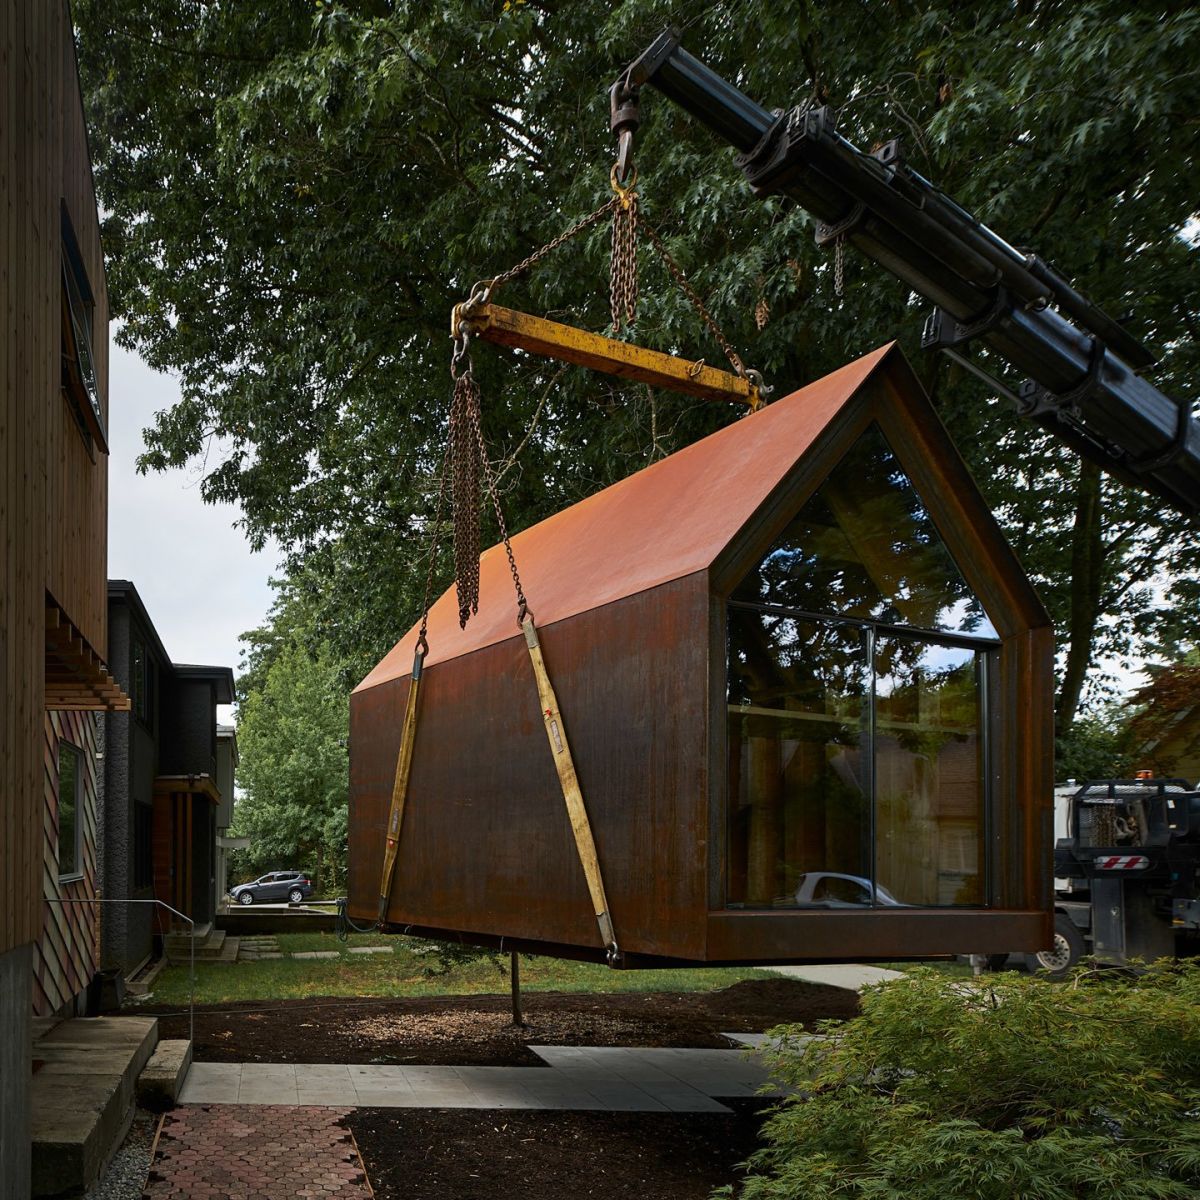 The corten steel exterior forms a seamless shell with no visible fasteners and this gives the cabin a minimalist look